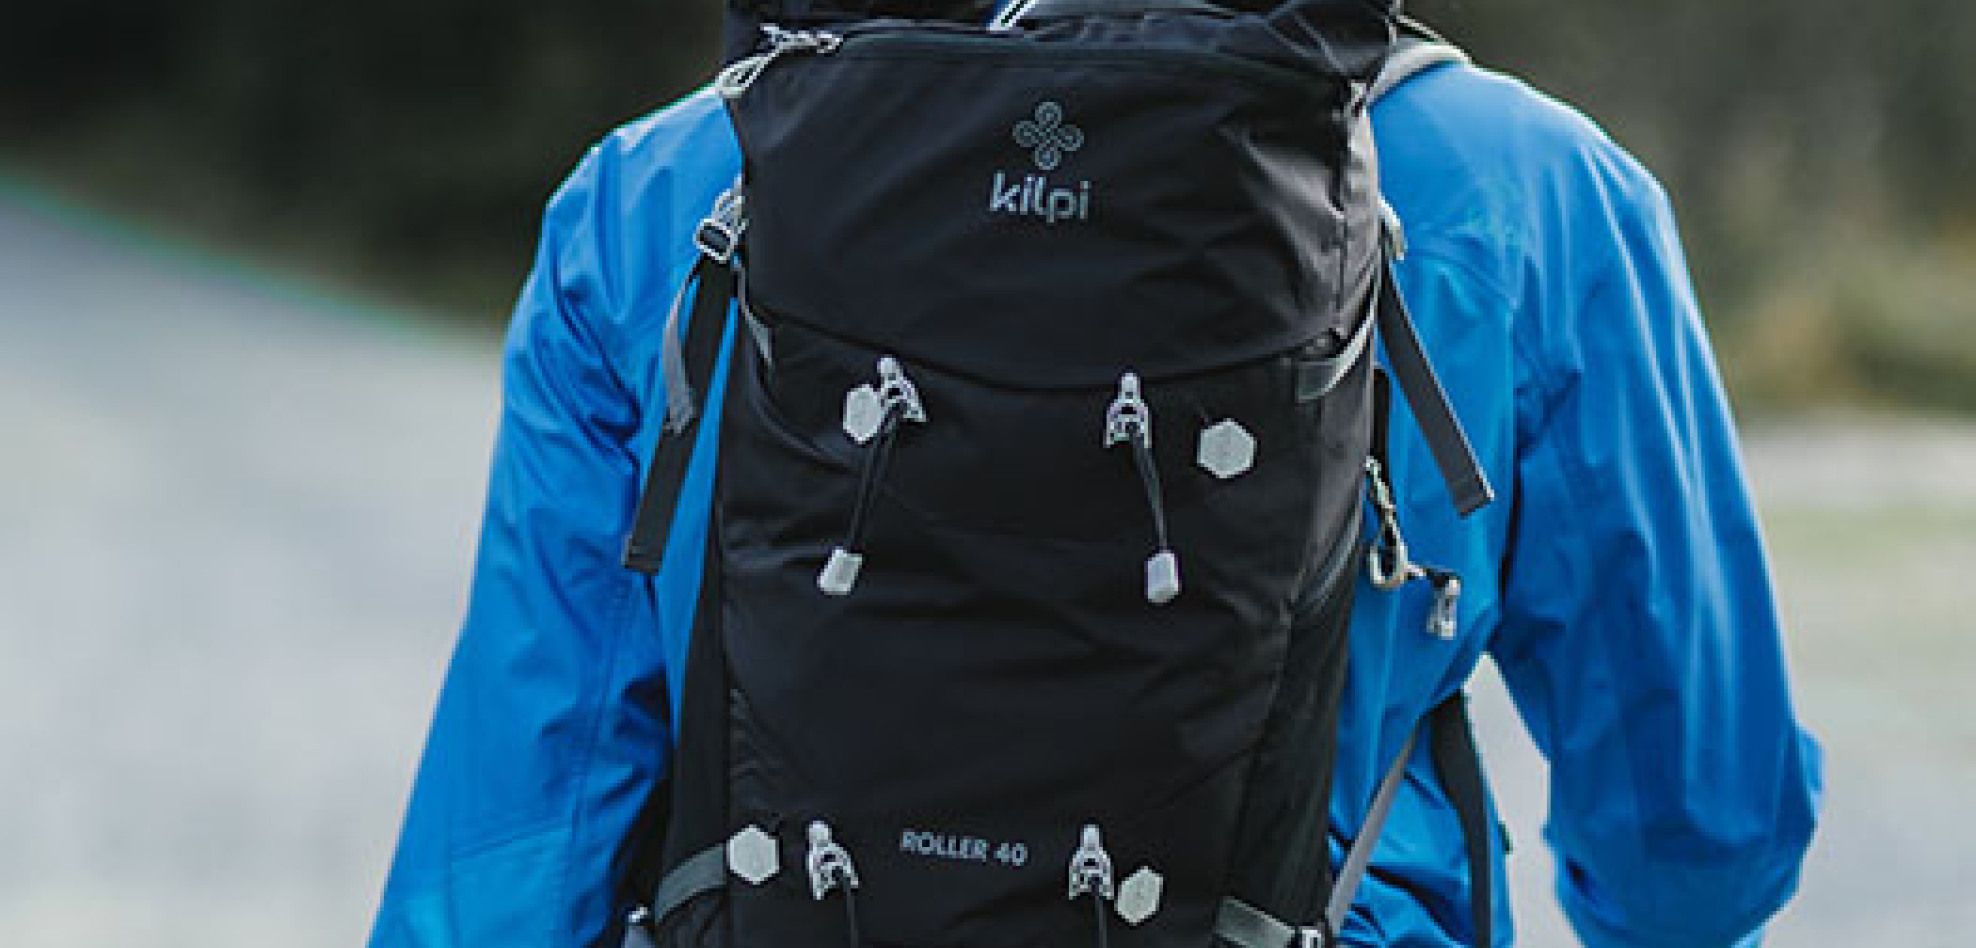 Comparison of Kilpi backpacks designed for every sporting activity